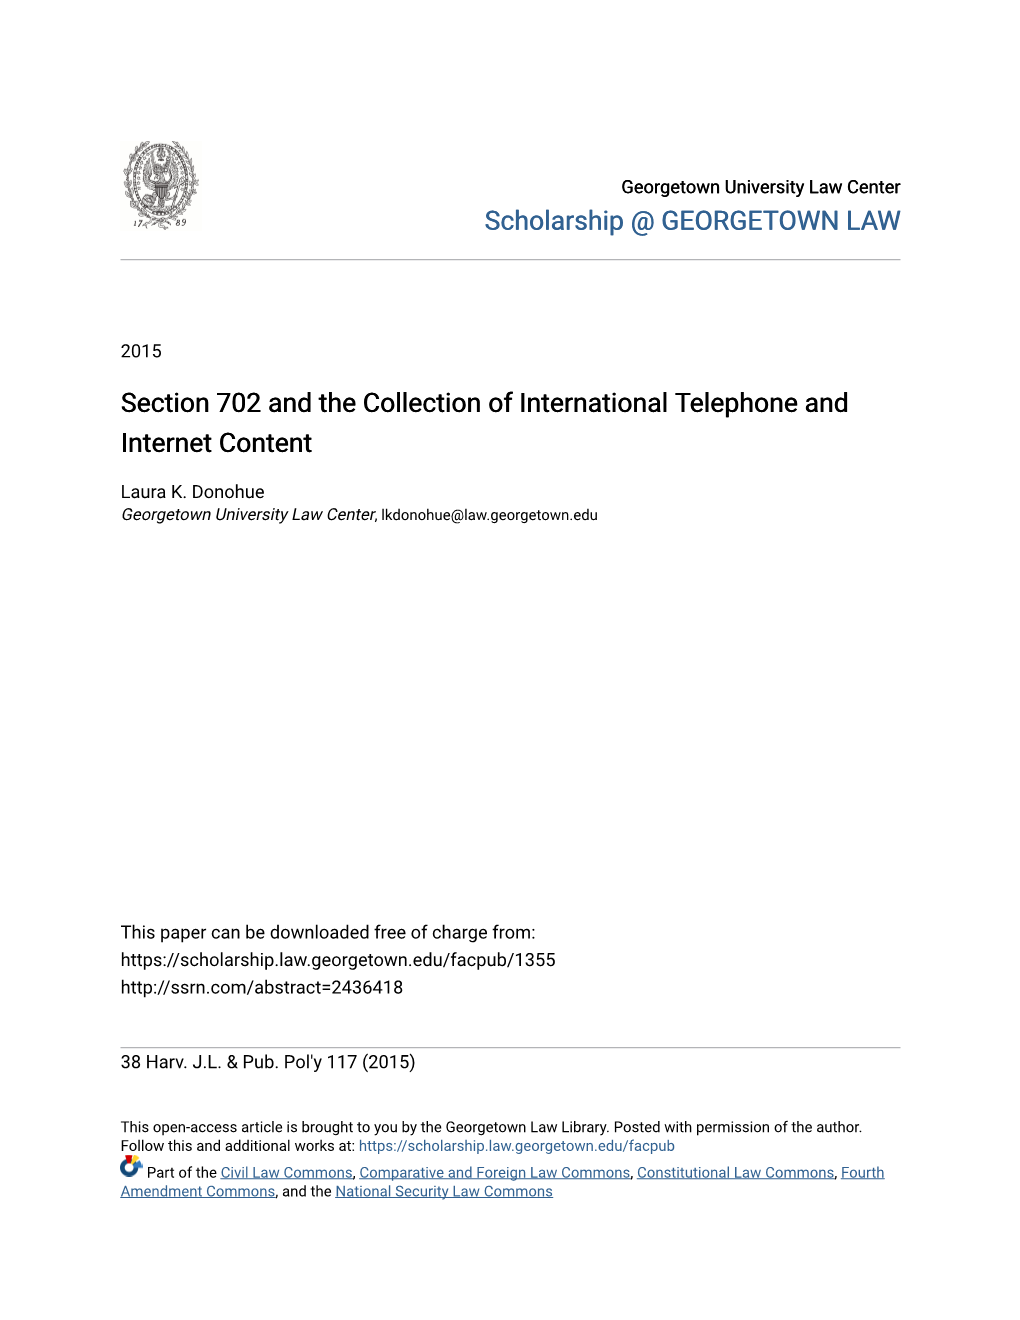 Section 702 and the Collection of International Telephone and Internet Content